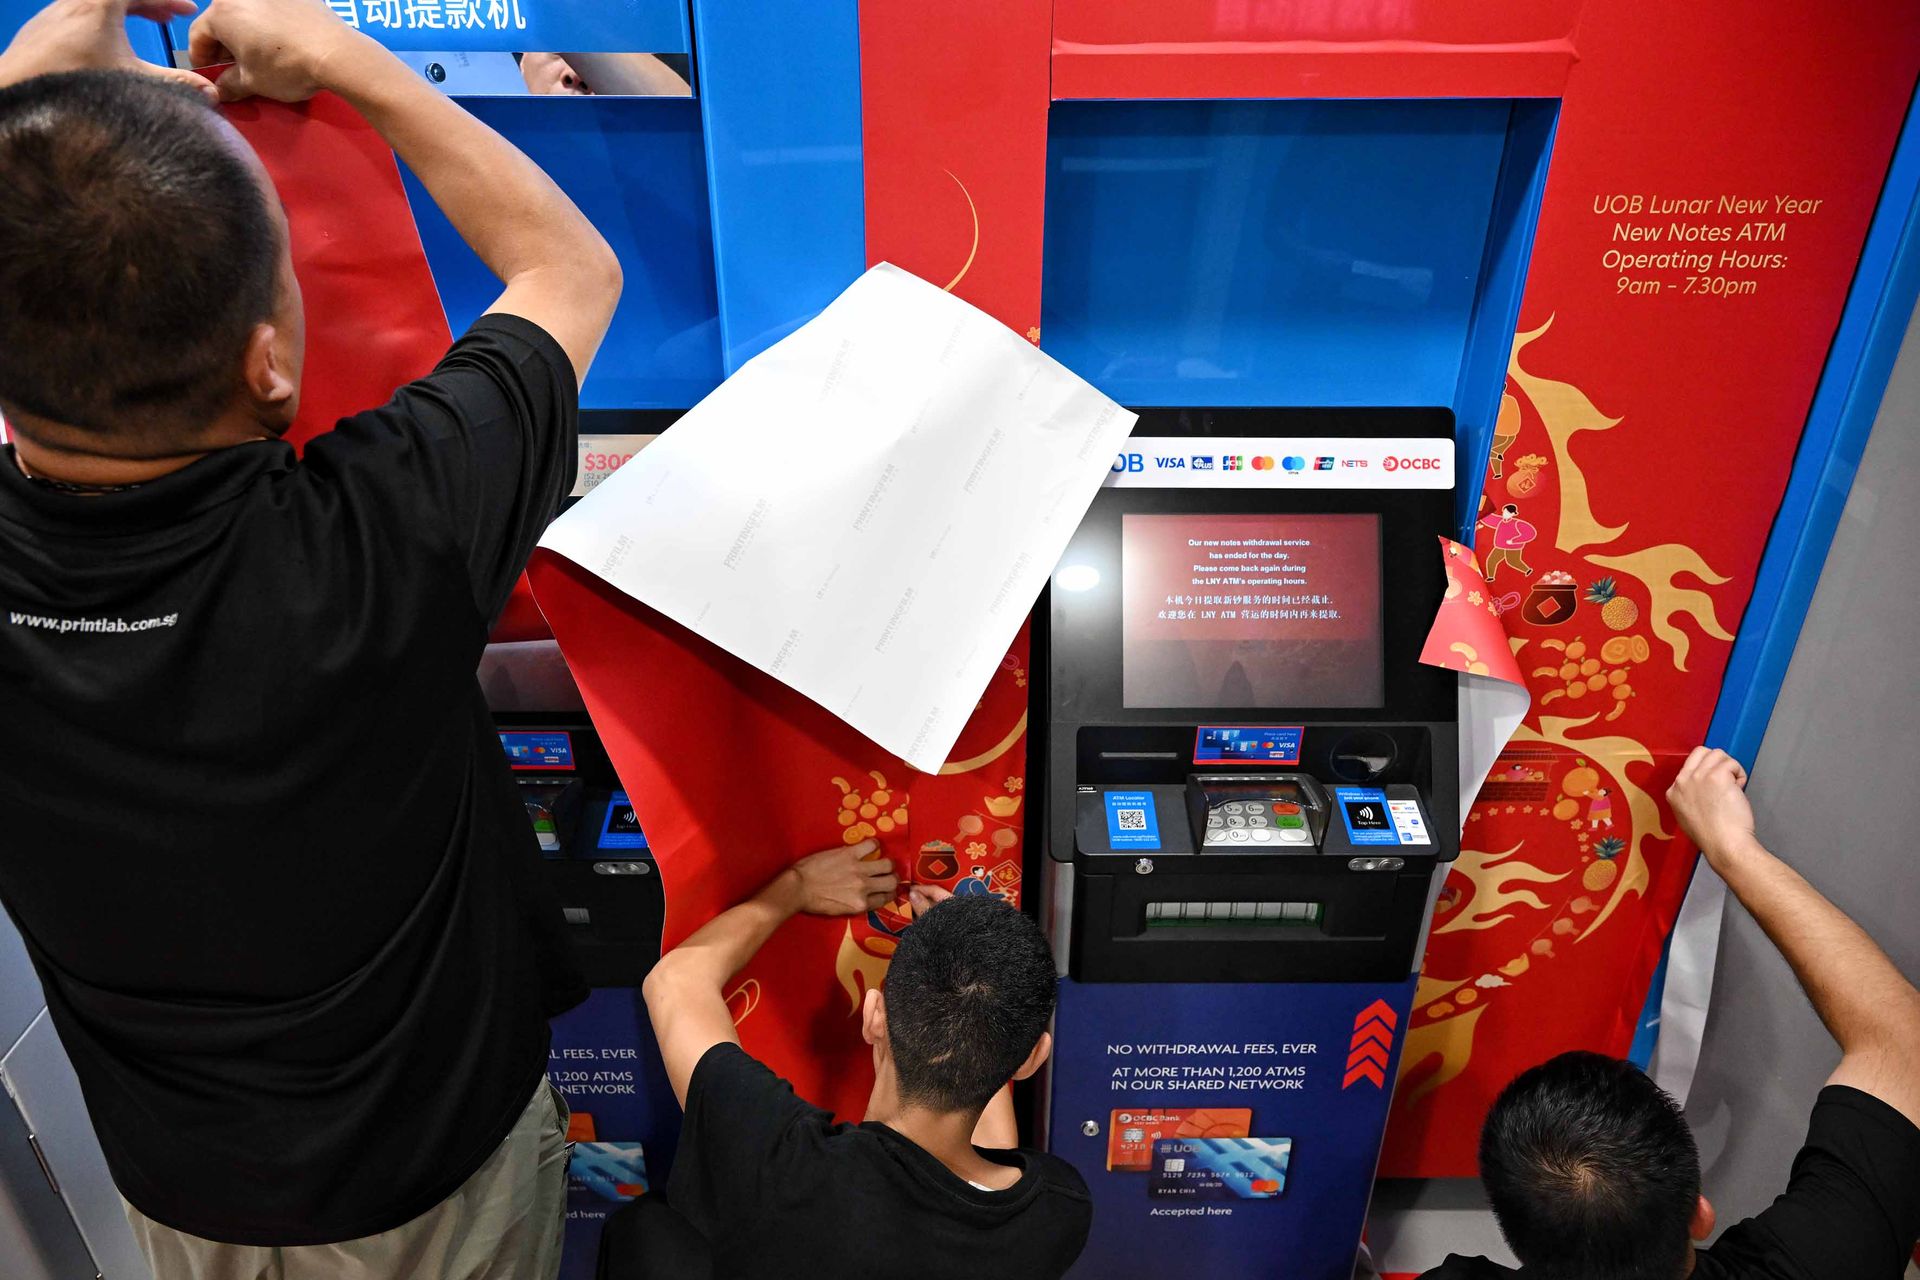 The ATMs at UOB Rochor branch in Fu Lu Shou Complex being decorated with festive decals the night before the withdrawal of new notes starts.